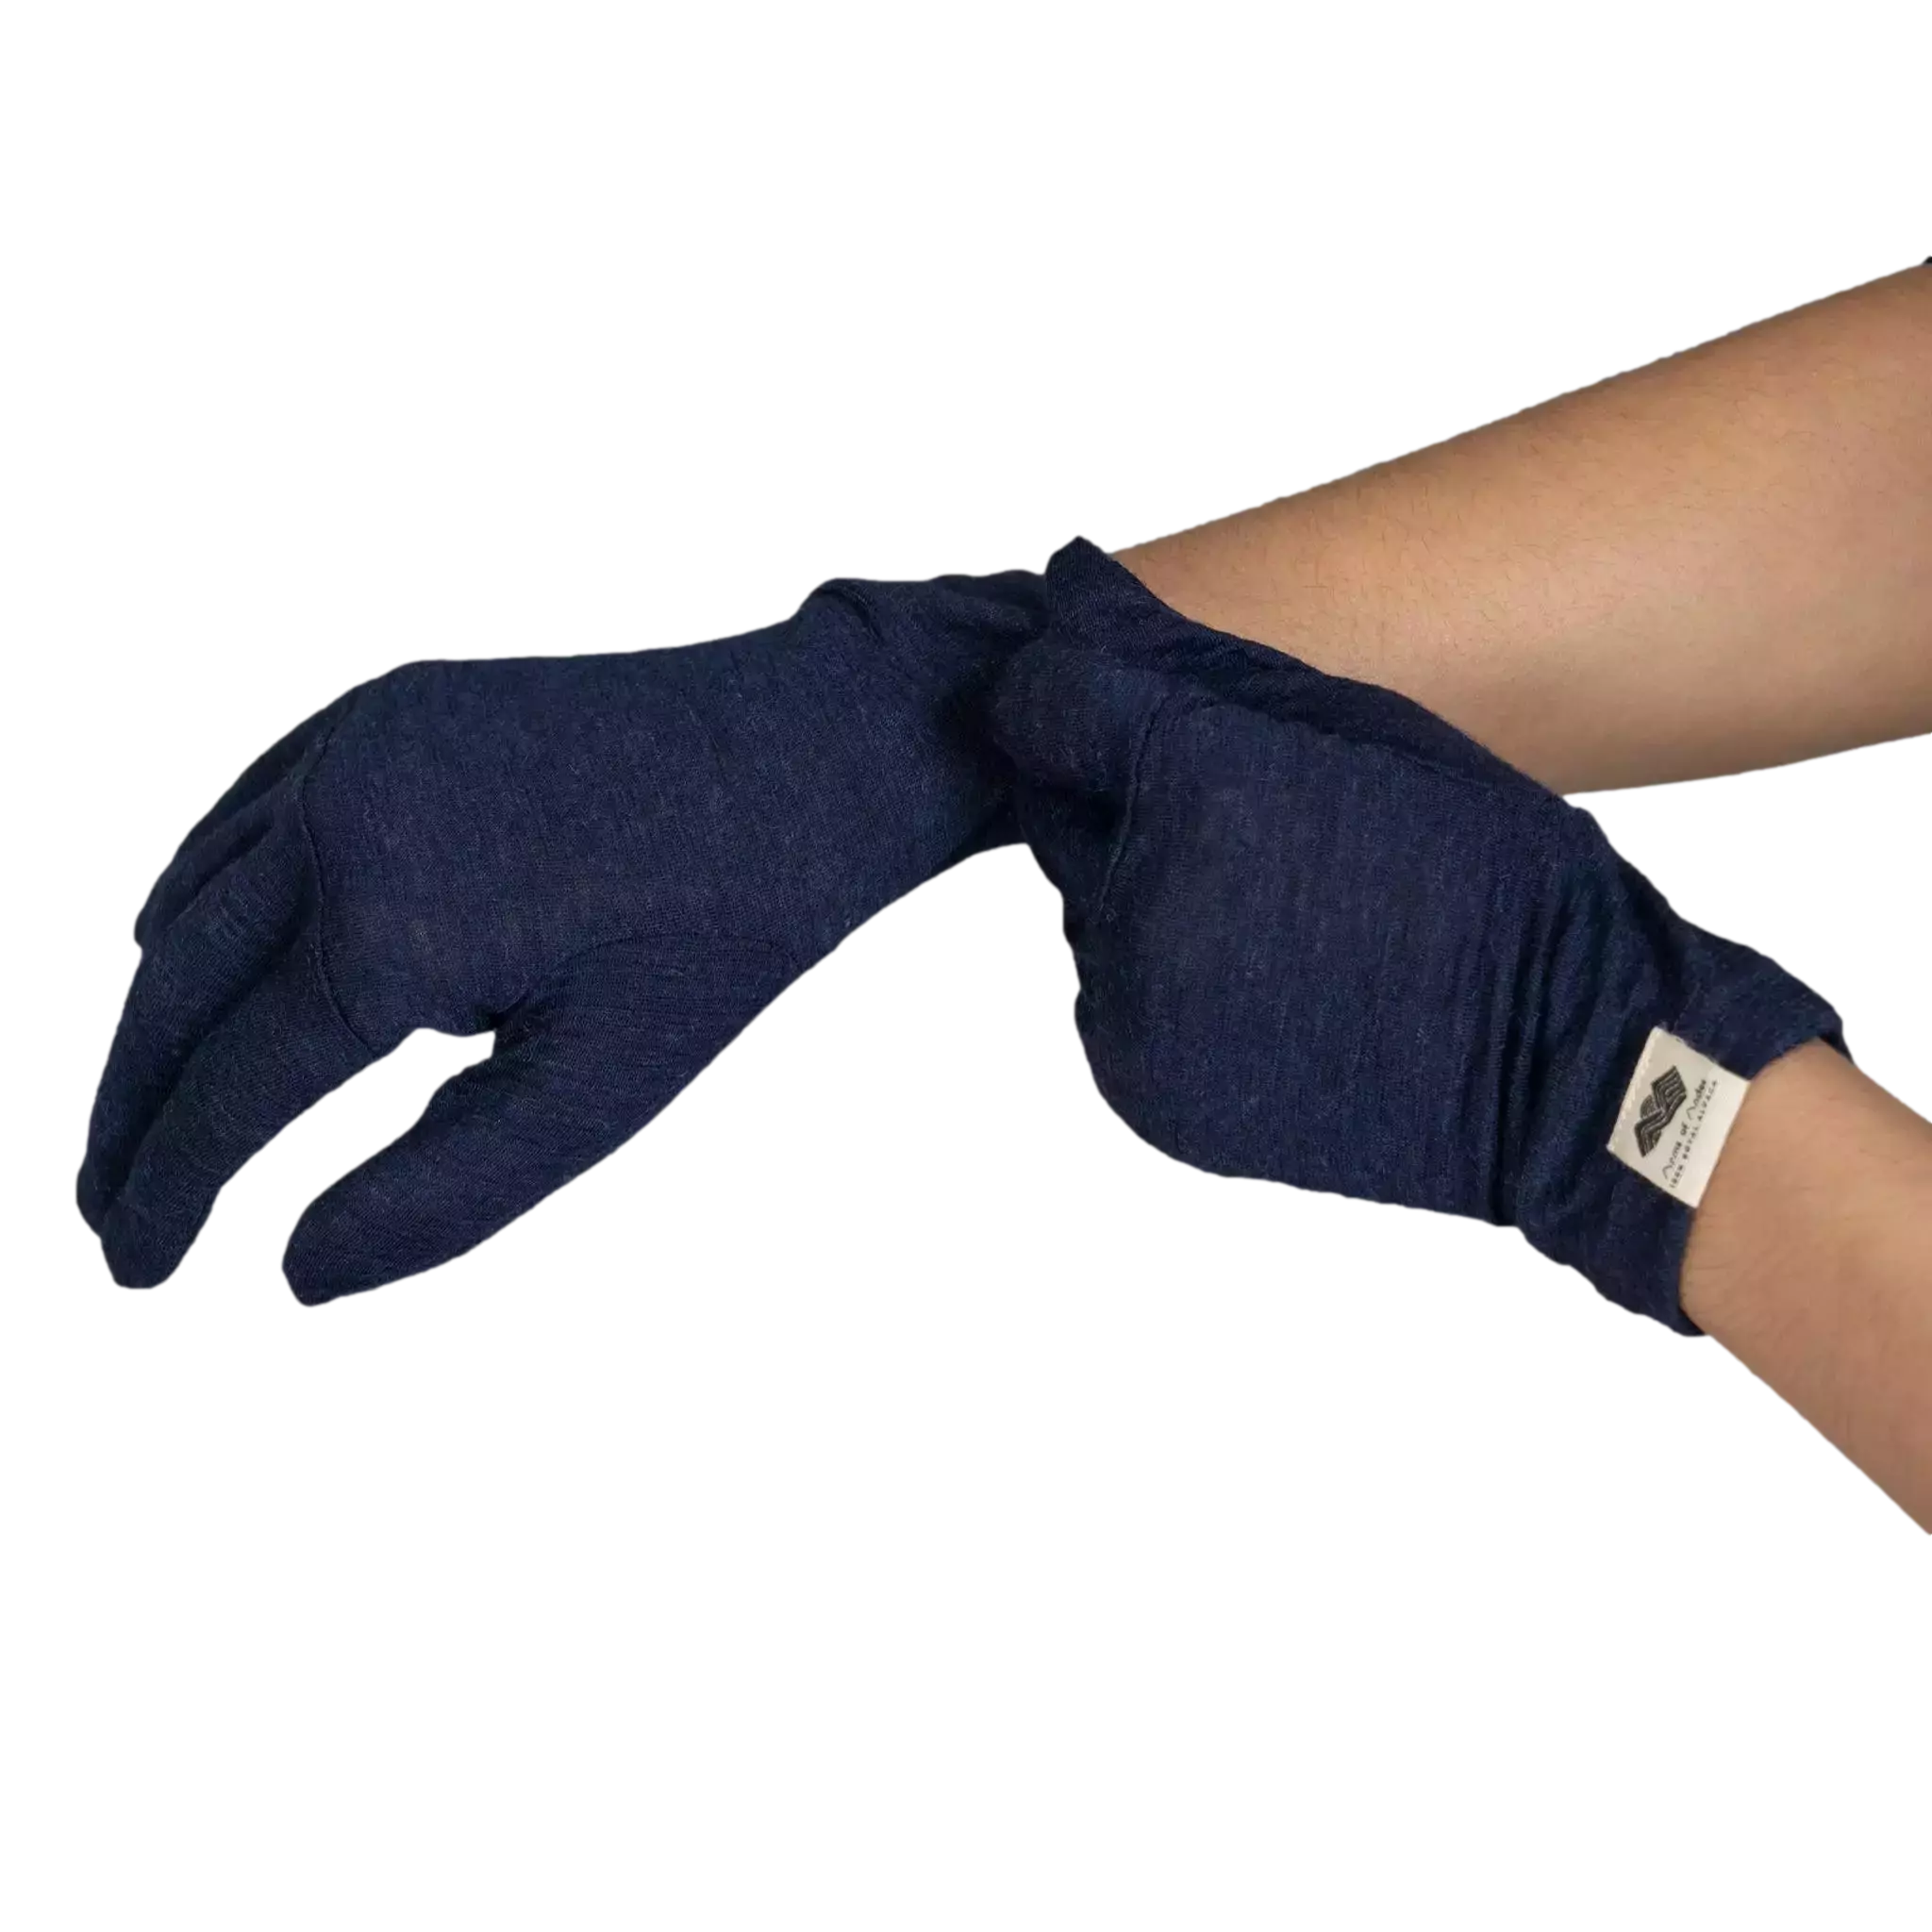 glove most comfortable liners ultralight color navy blue